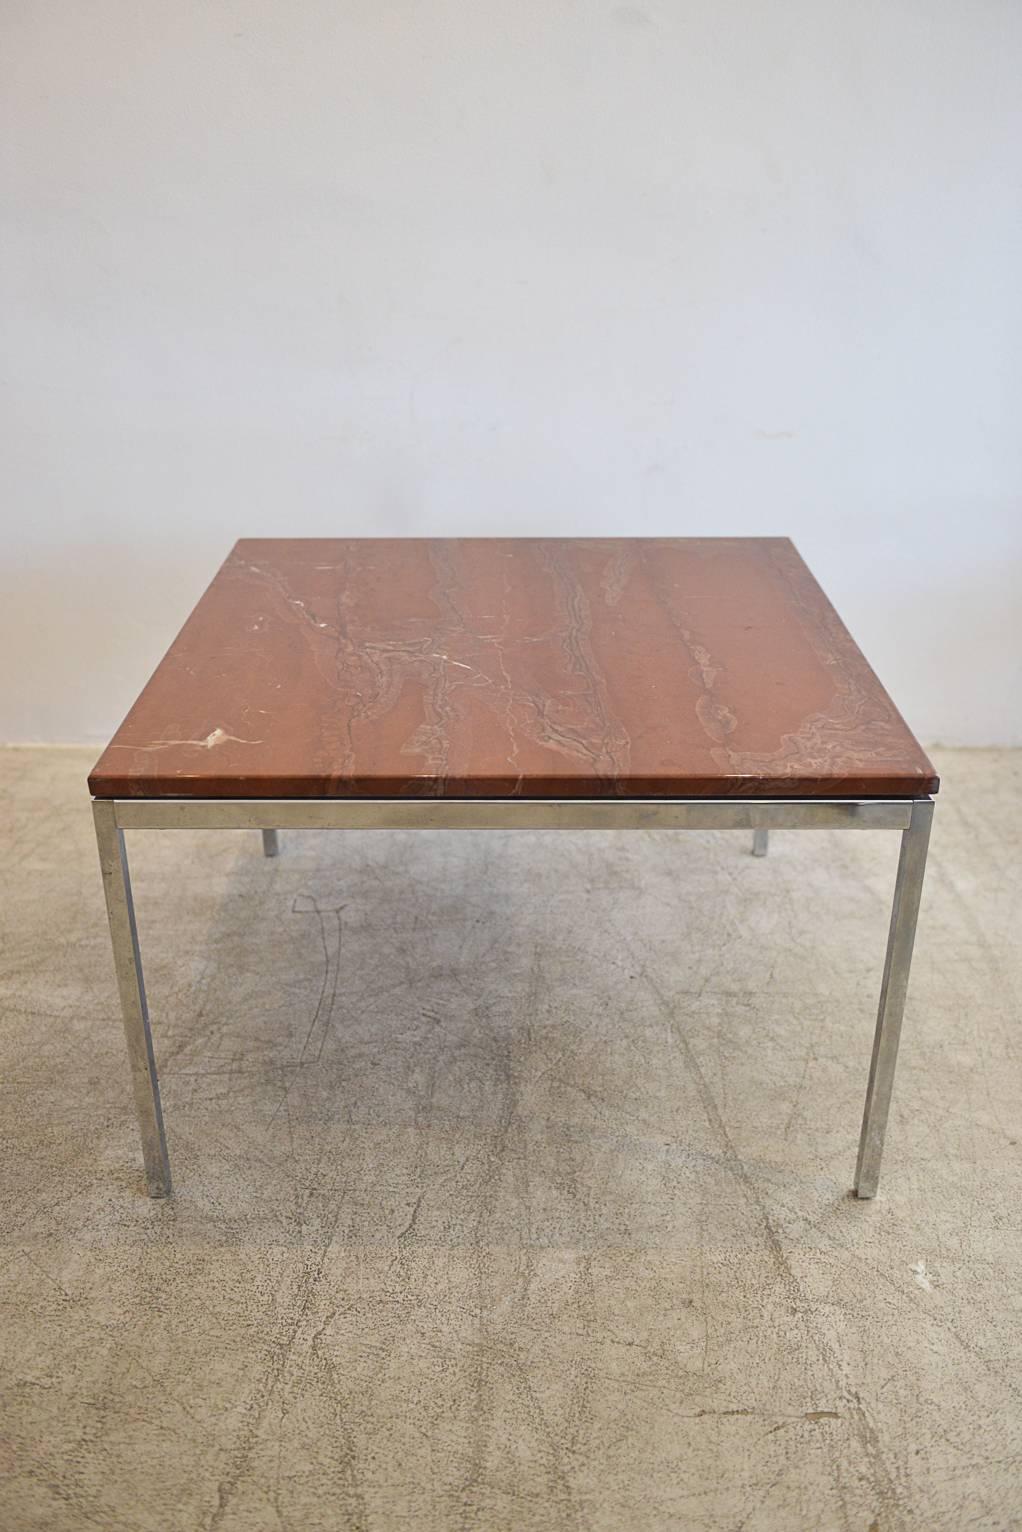 Rare Spanish Rojo Alicante marble coffee table by Knoll. Beautiful graining and color in this piece, marked on underside. Chrome is excellent and marble is free from cracks or chips. Marble is 7/8" Thick.

Measures: 29.5" square x